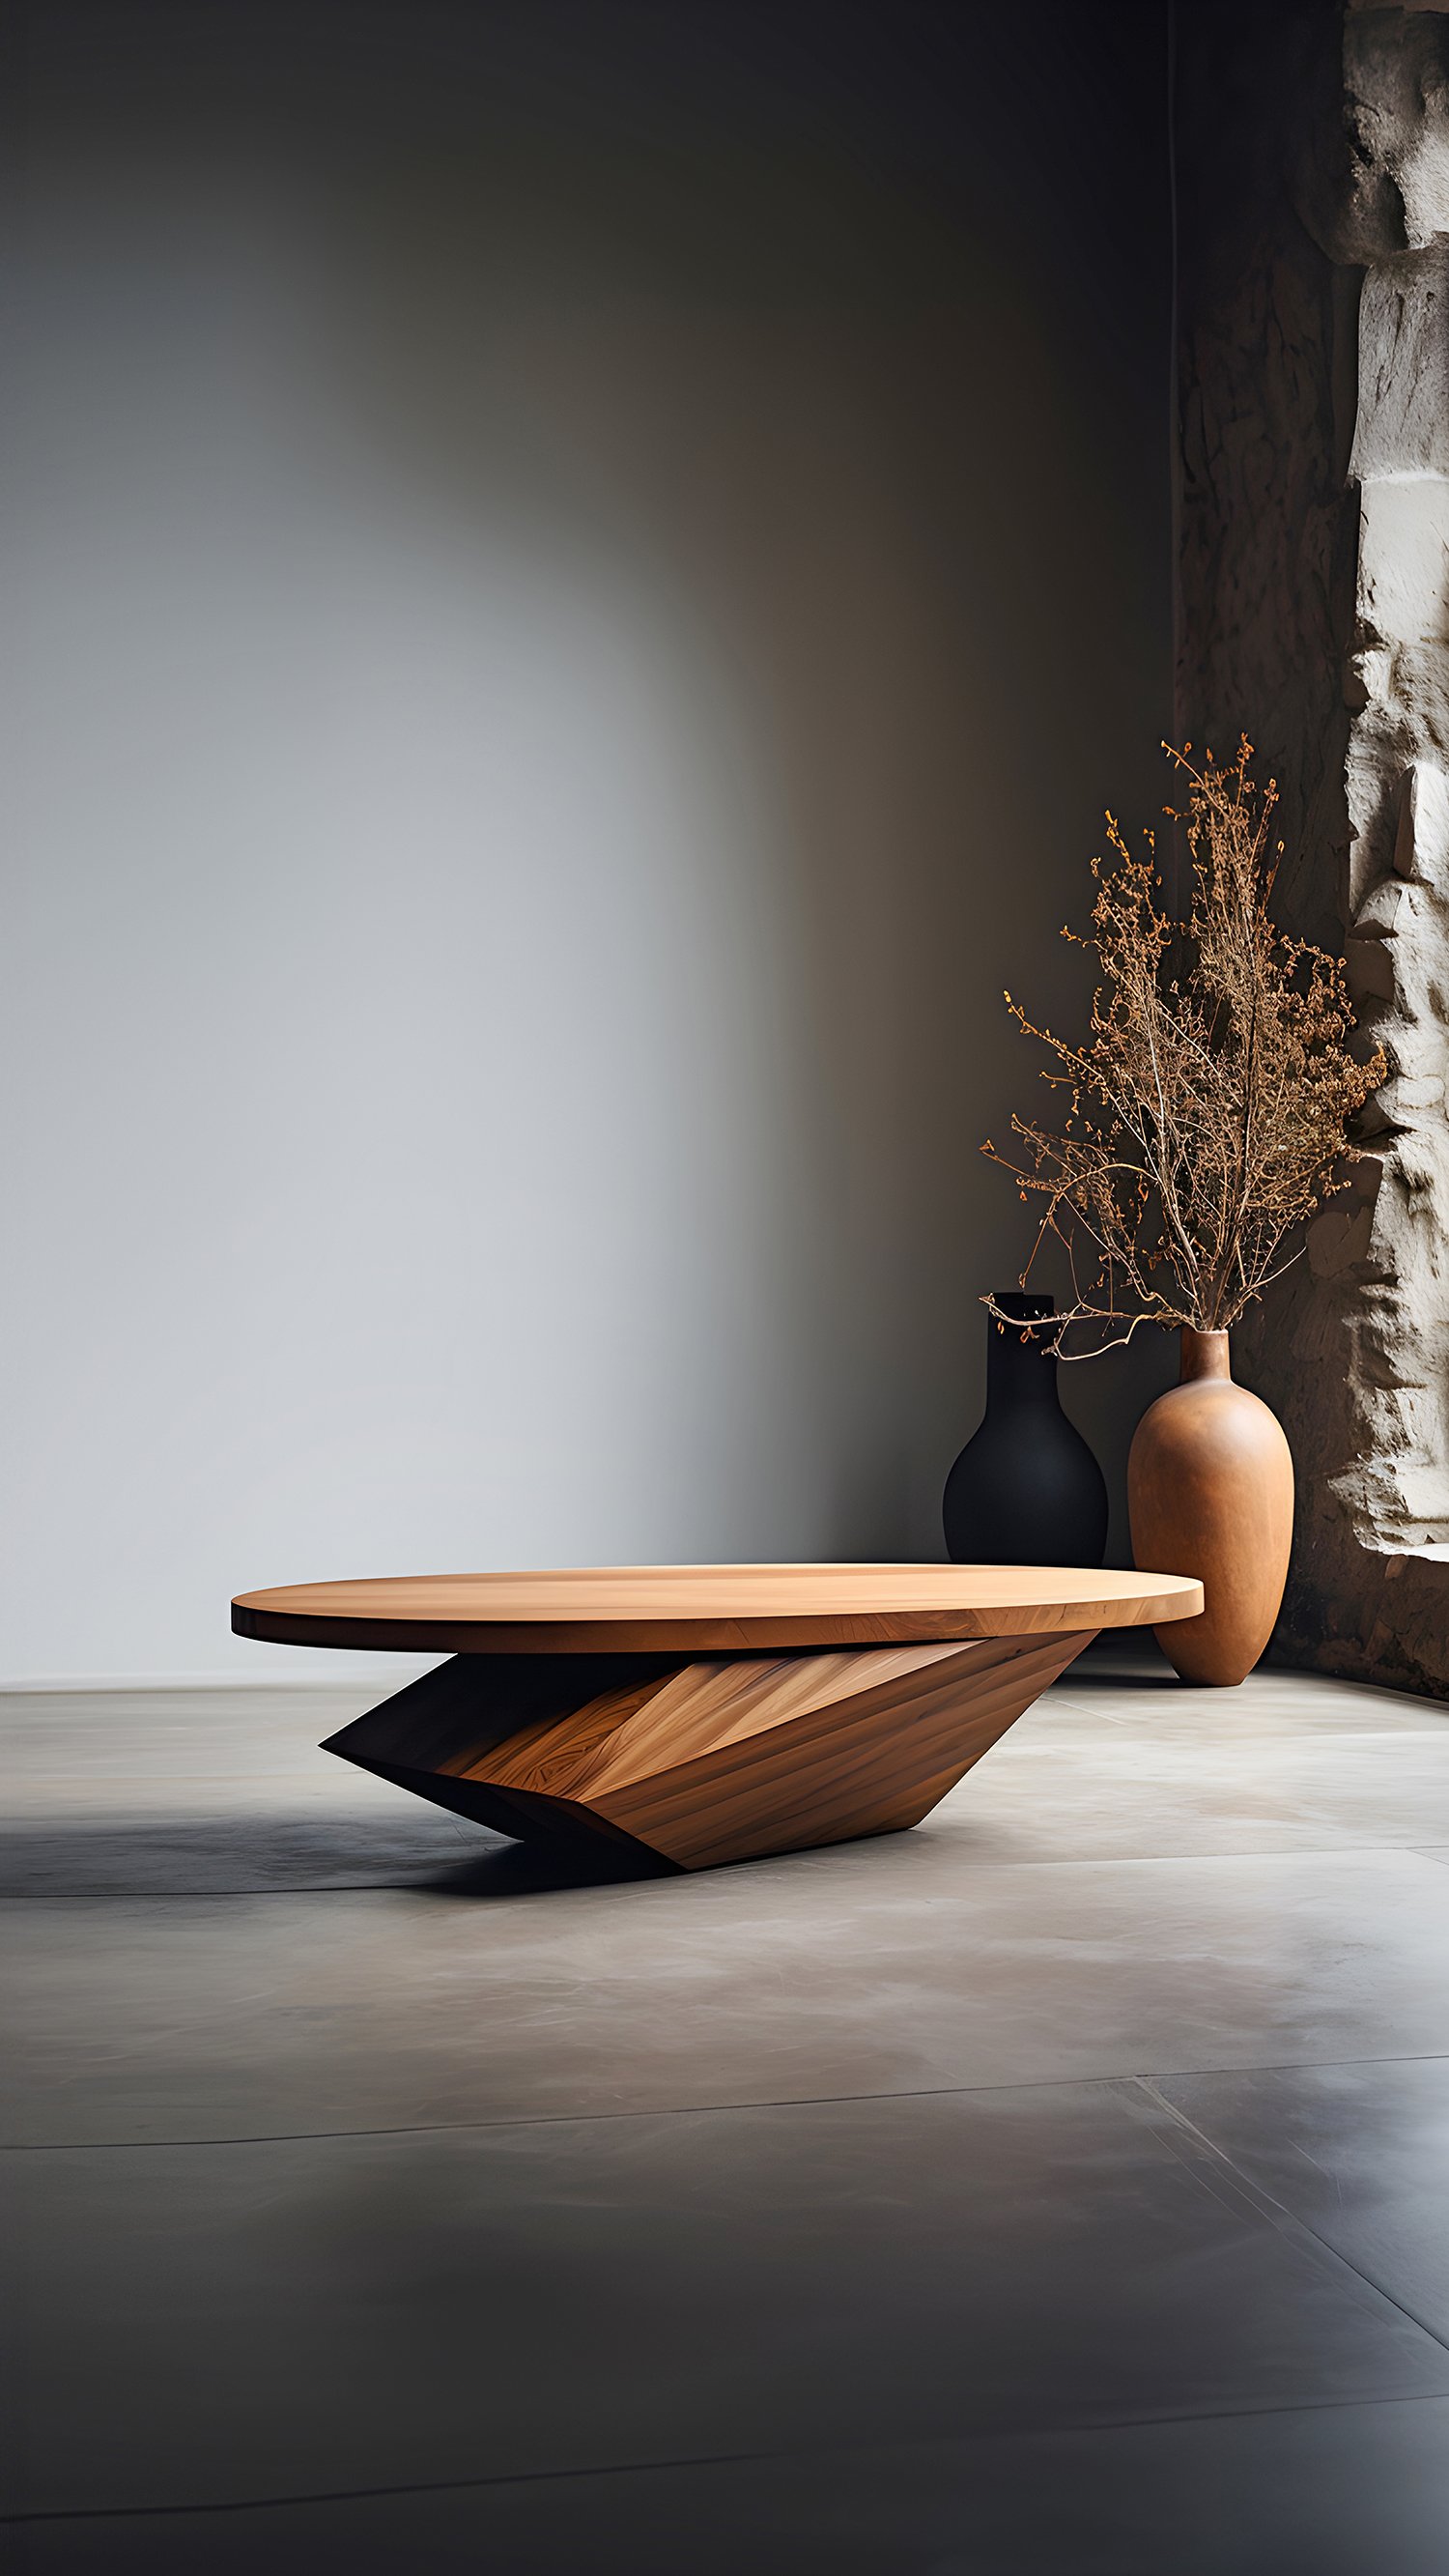 Sculptural Coffee Table Made of Solid Wood, Center Table Solace S13 by Joel Escalona — 5.jpg